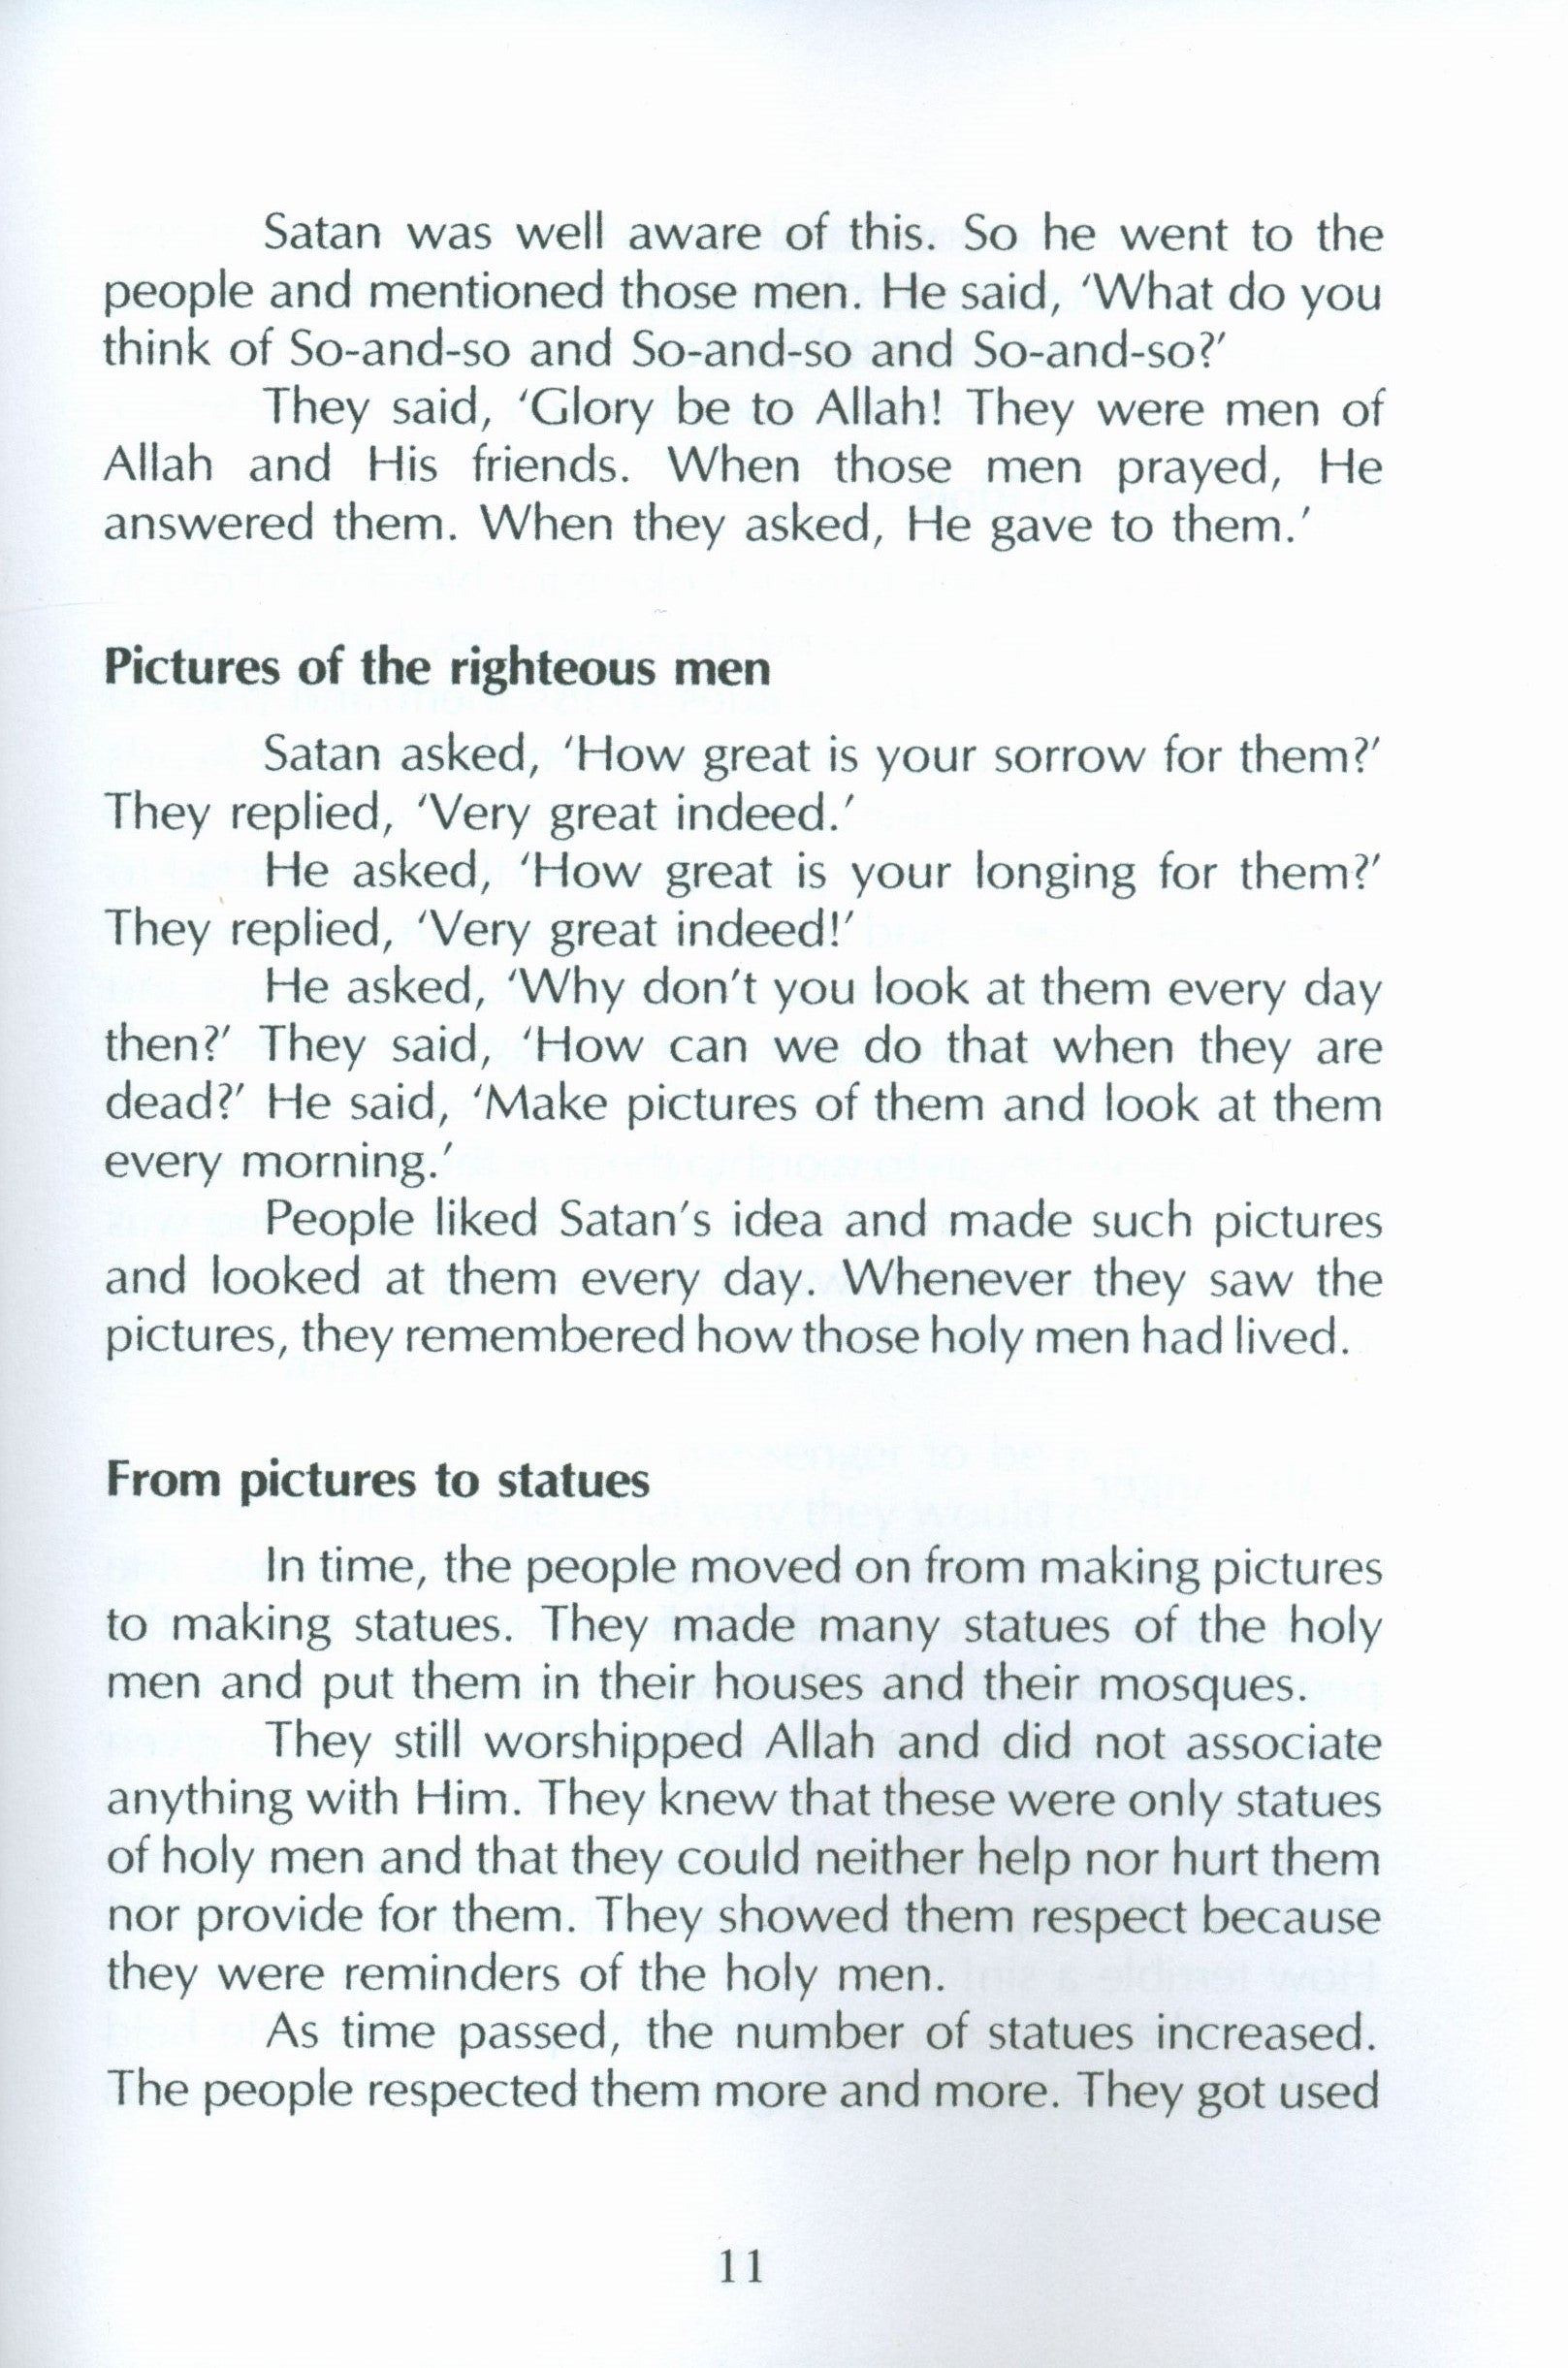 Stories of the Prophets by Sayyed Abul Hasan Ali Nadwi